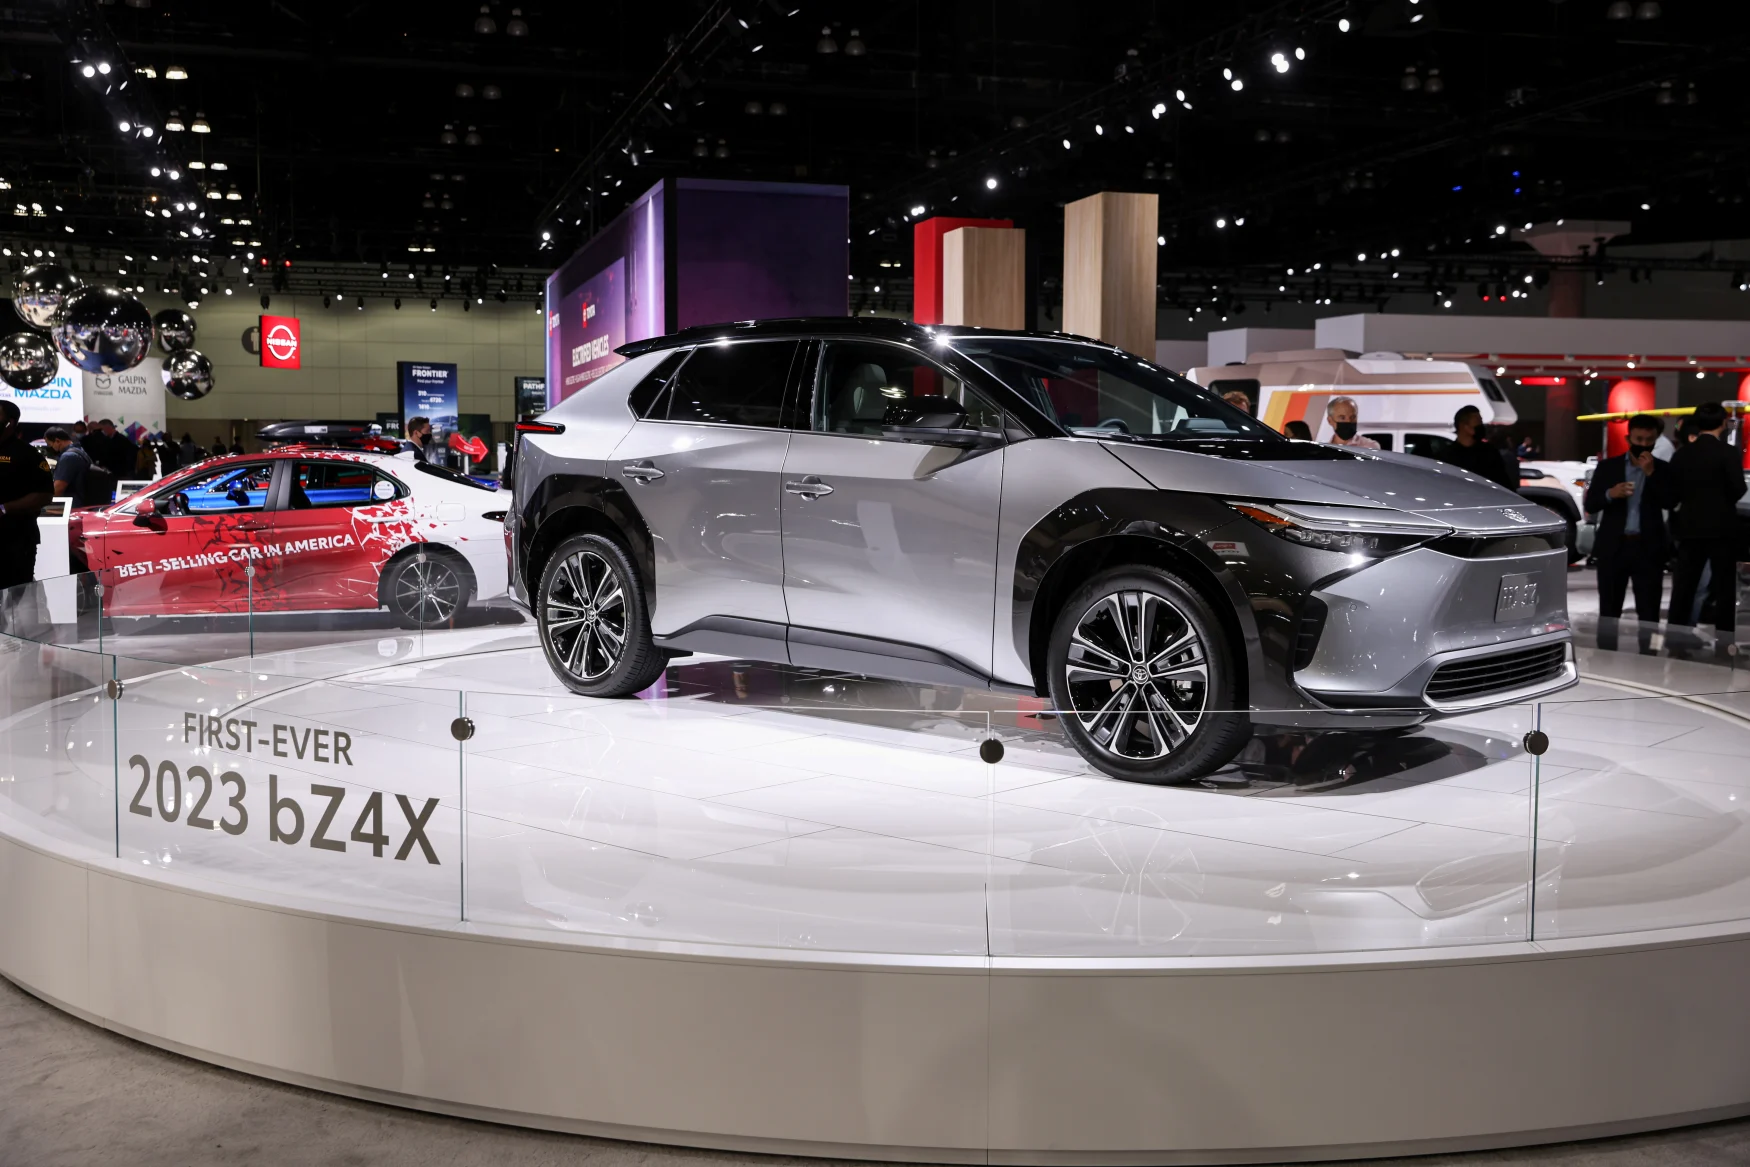 The 2023 Toyota bZ4X all-electric SUV is displayed during the 2021 Los Angeles Auto Show in Los Angeles, California, U.S., November 17, 2021. REUTERS/Mike Blake